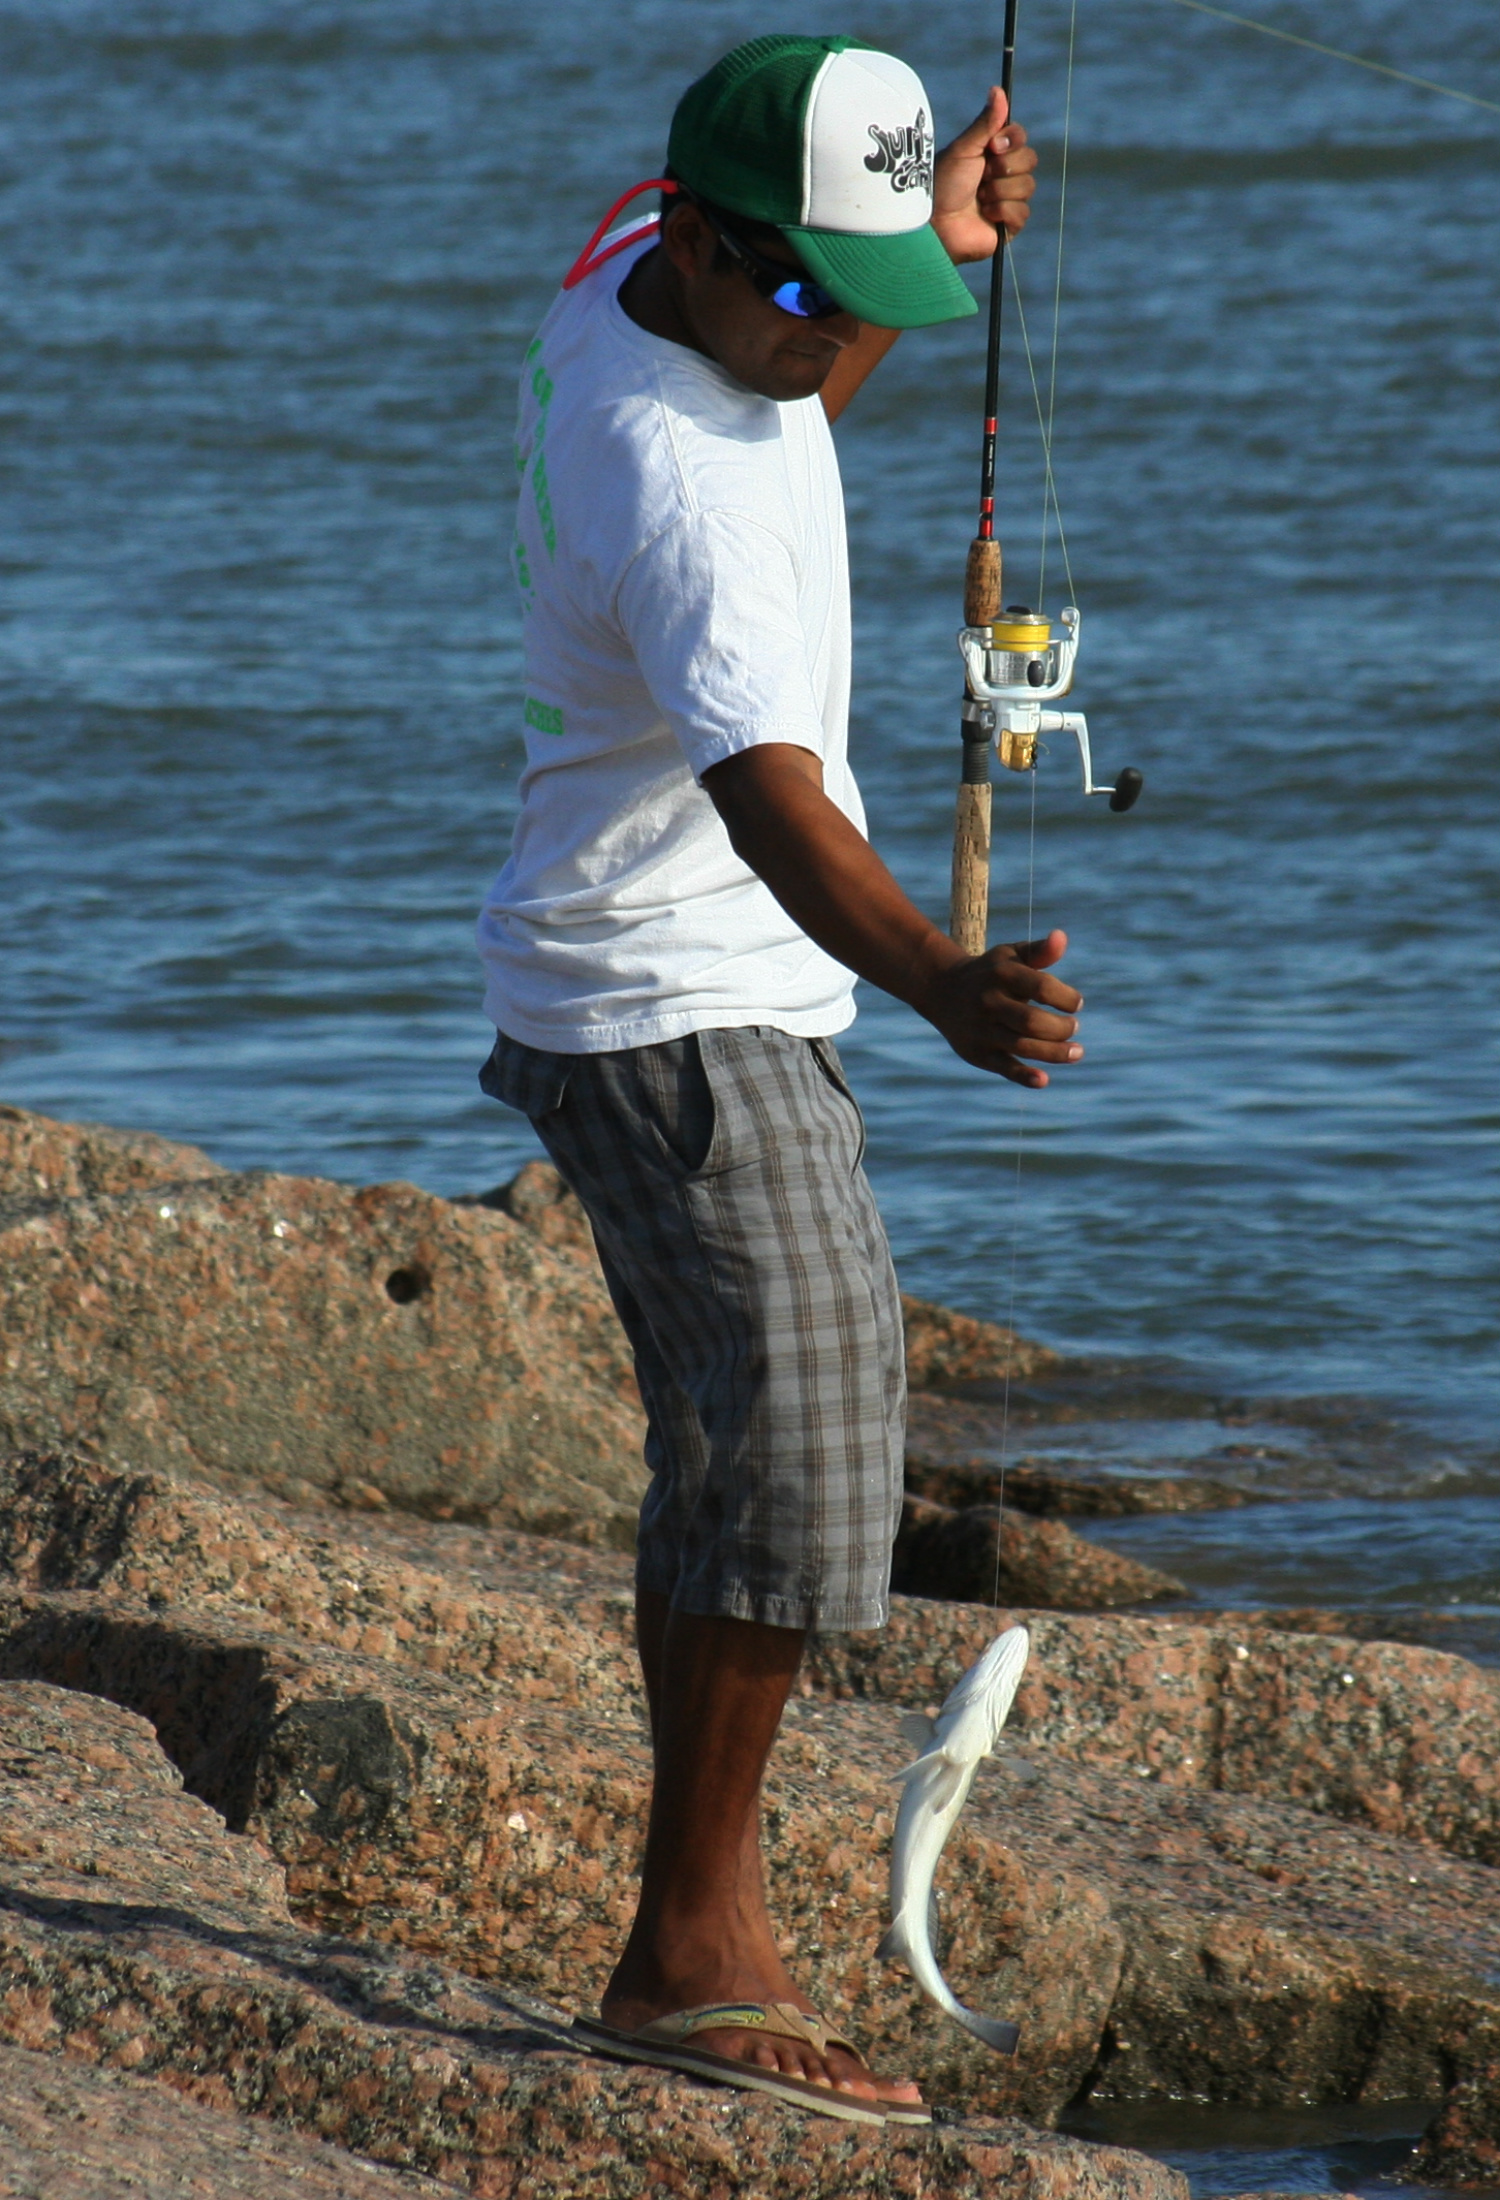 Texas jetty fishing provides some of the finest angling conditions  imaginable